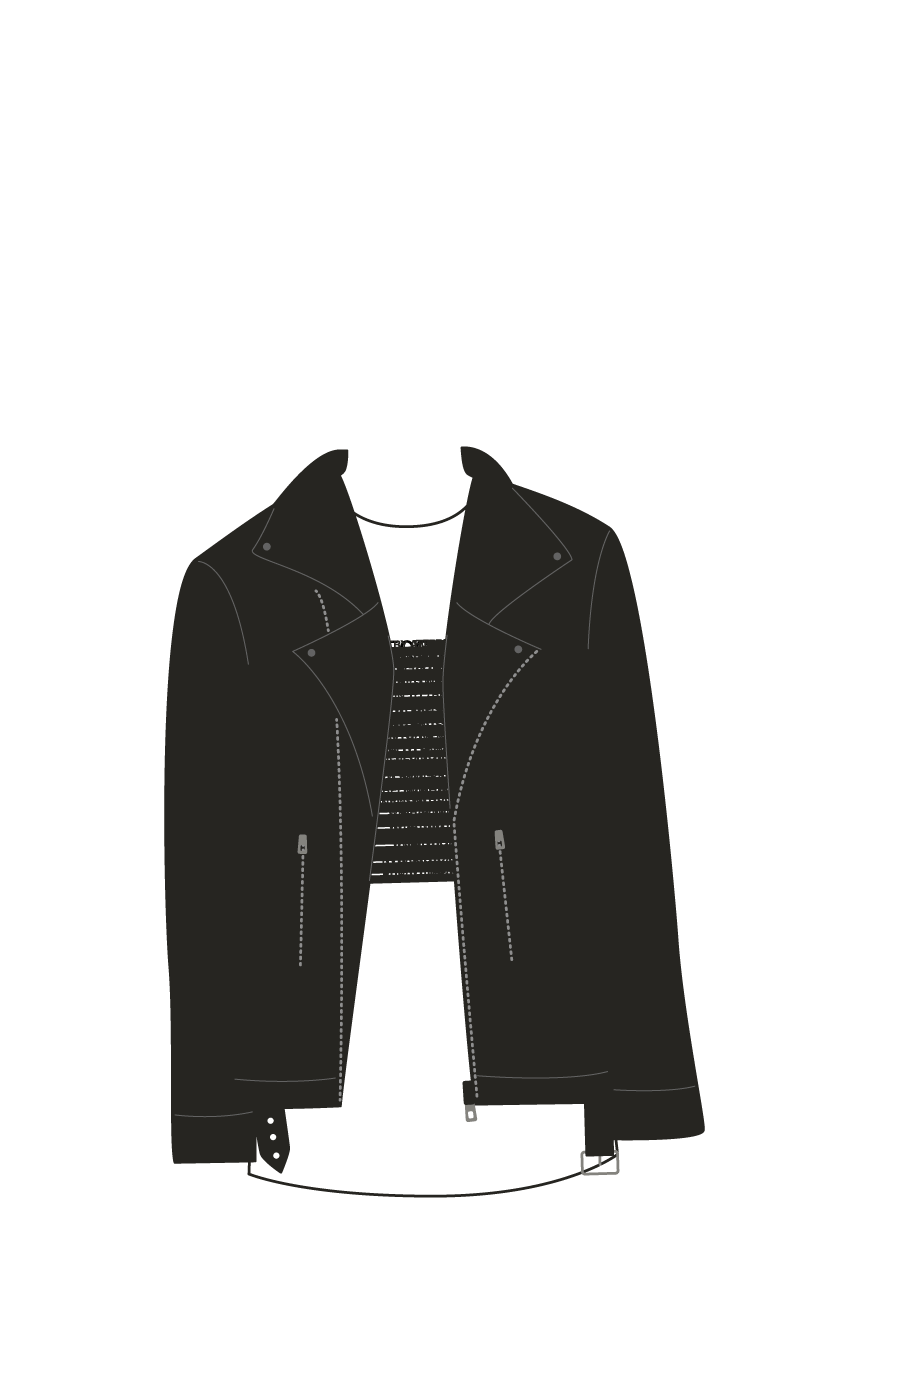 white t-shirt with black square and black leather jacket